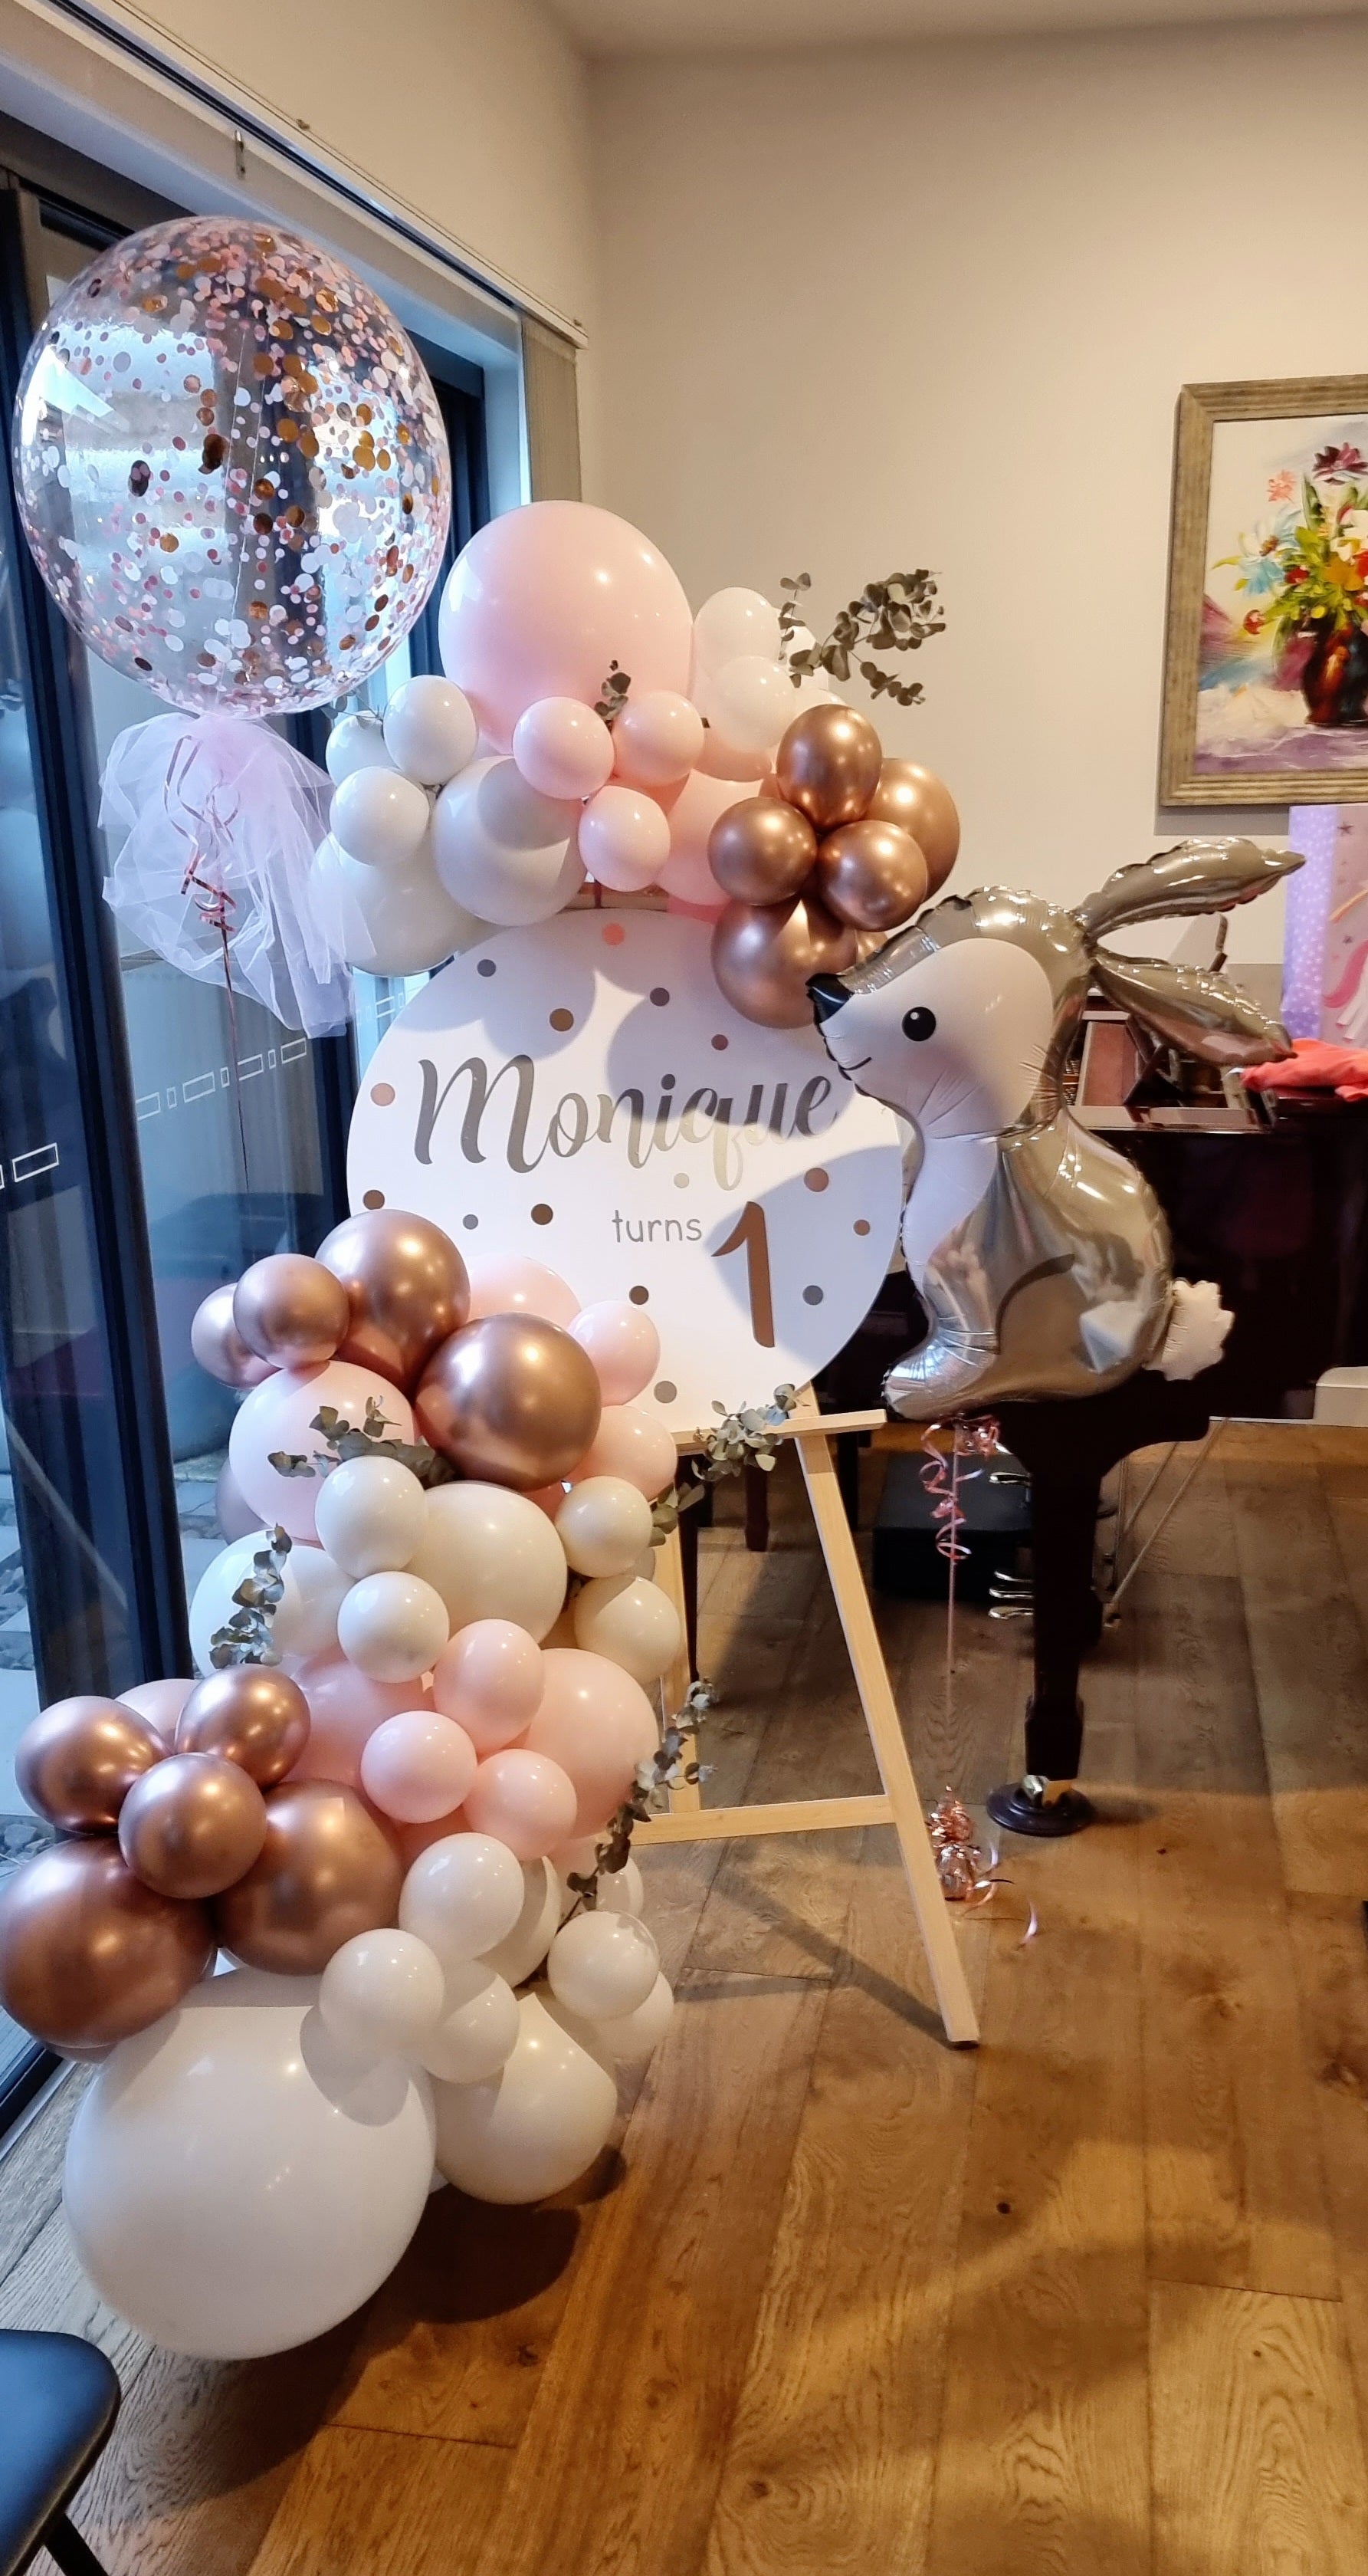 Balloon Easel Display Melbourne Monique Turns 1 Pink White Gold Bunny